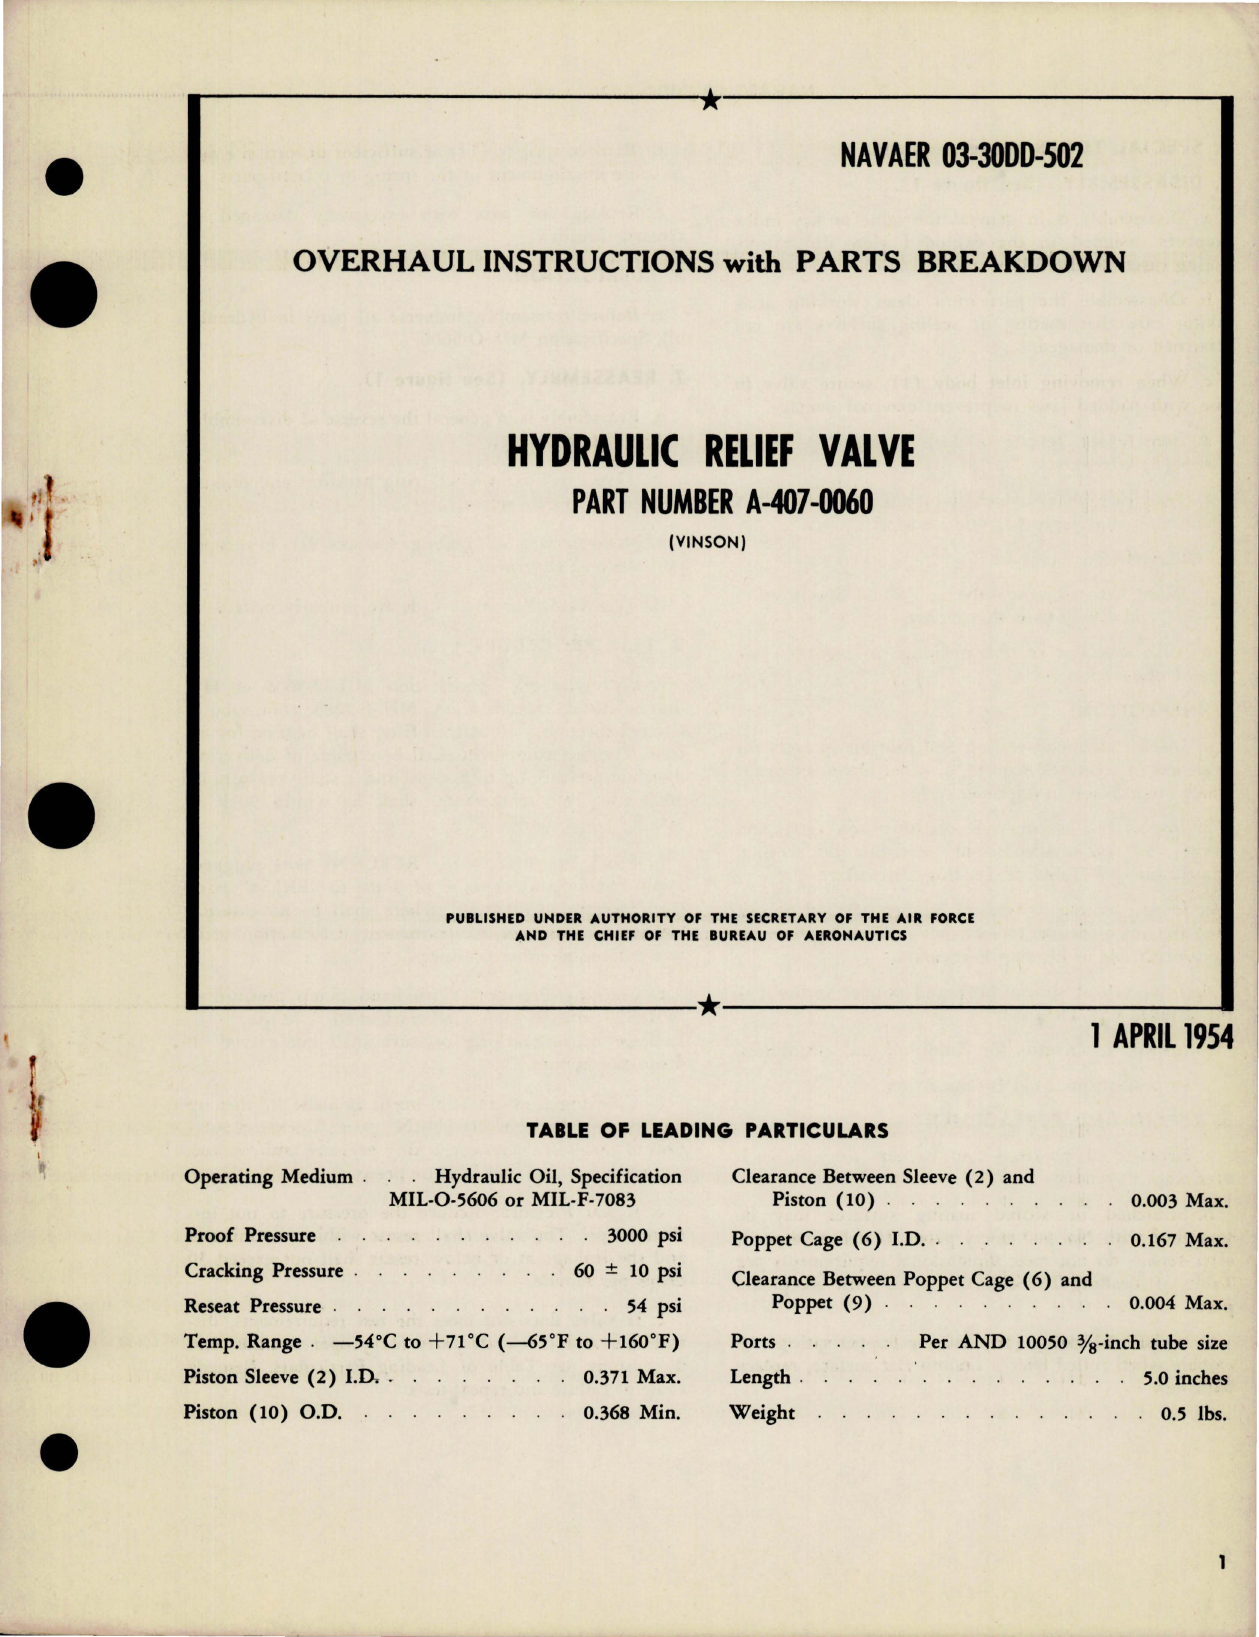 Sample page 1 from AirCorps Library document: Overhaul Instructions with Parts Breakdown for Hydraulic Relief Valve - Part A-407-0060